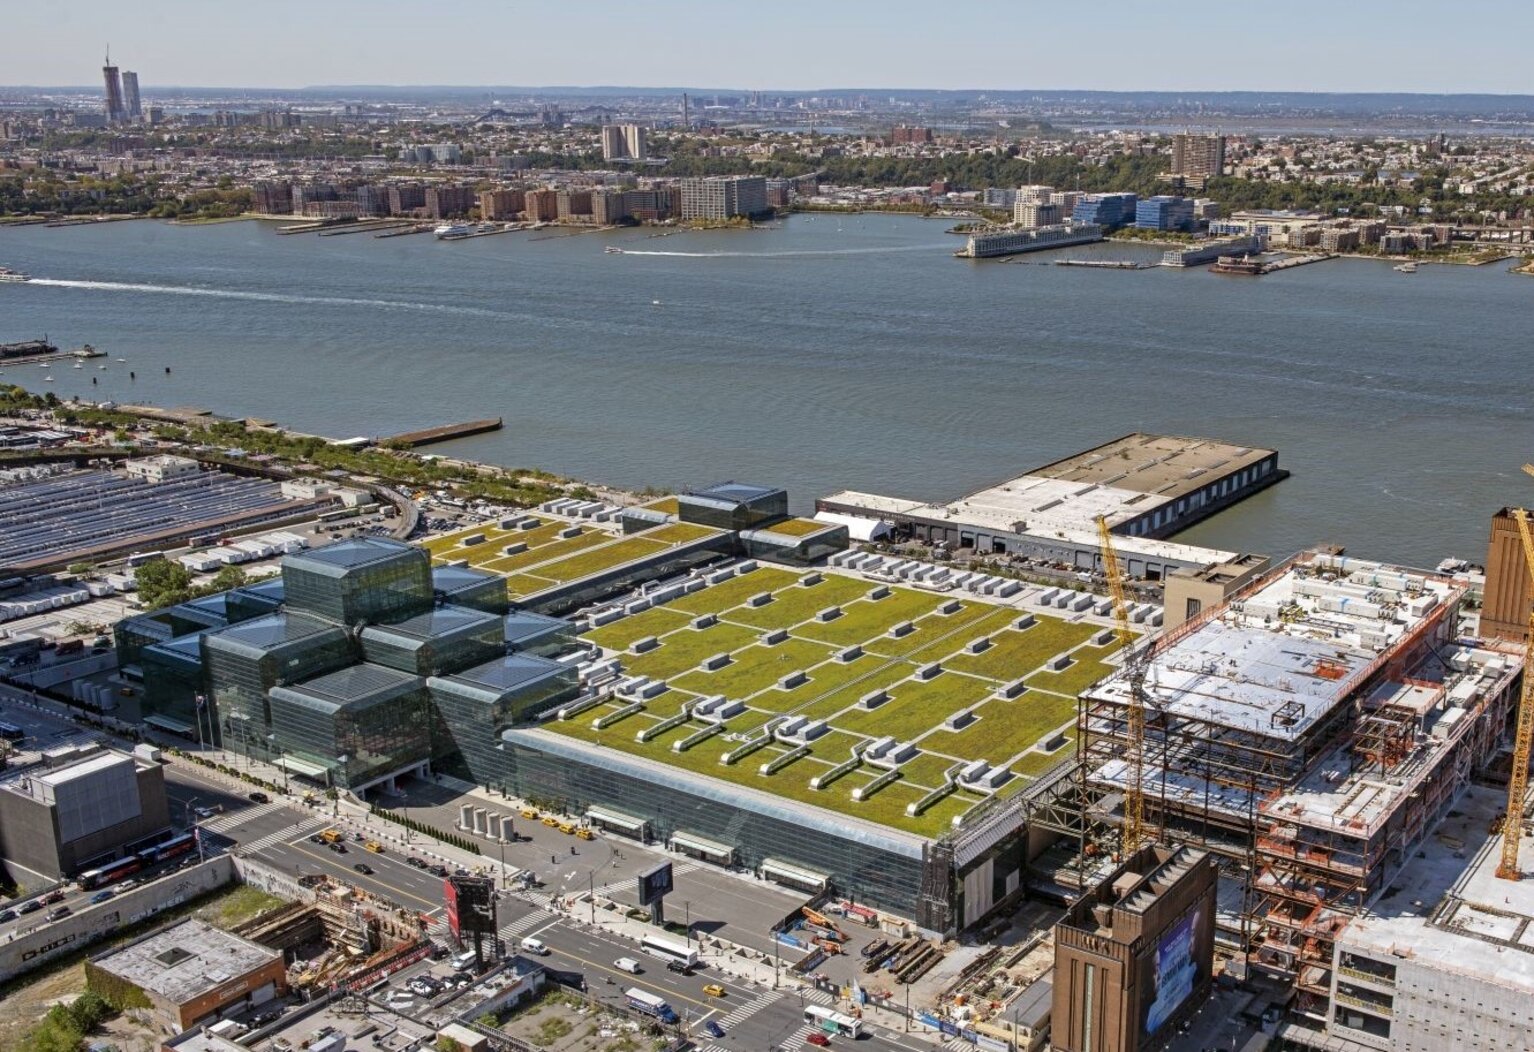 The renovated Jacob K. Javits Convention Center incorporates a bird-friendly facade and a seven-acre green roof. Photo courtesy of Jacob K. Javits Convention Center